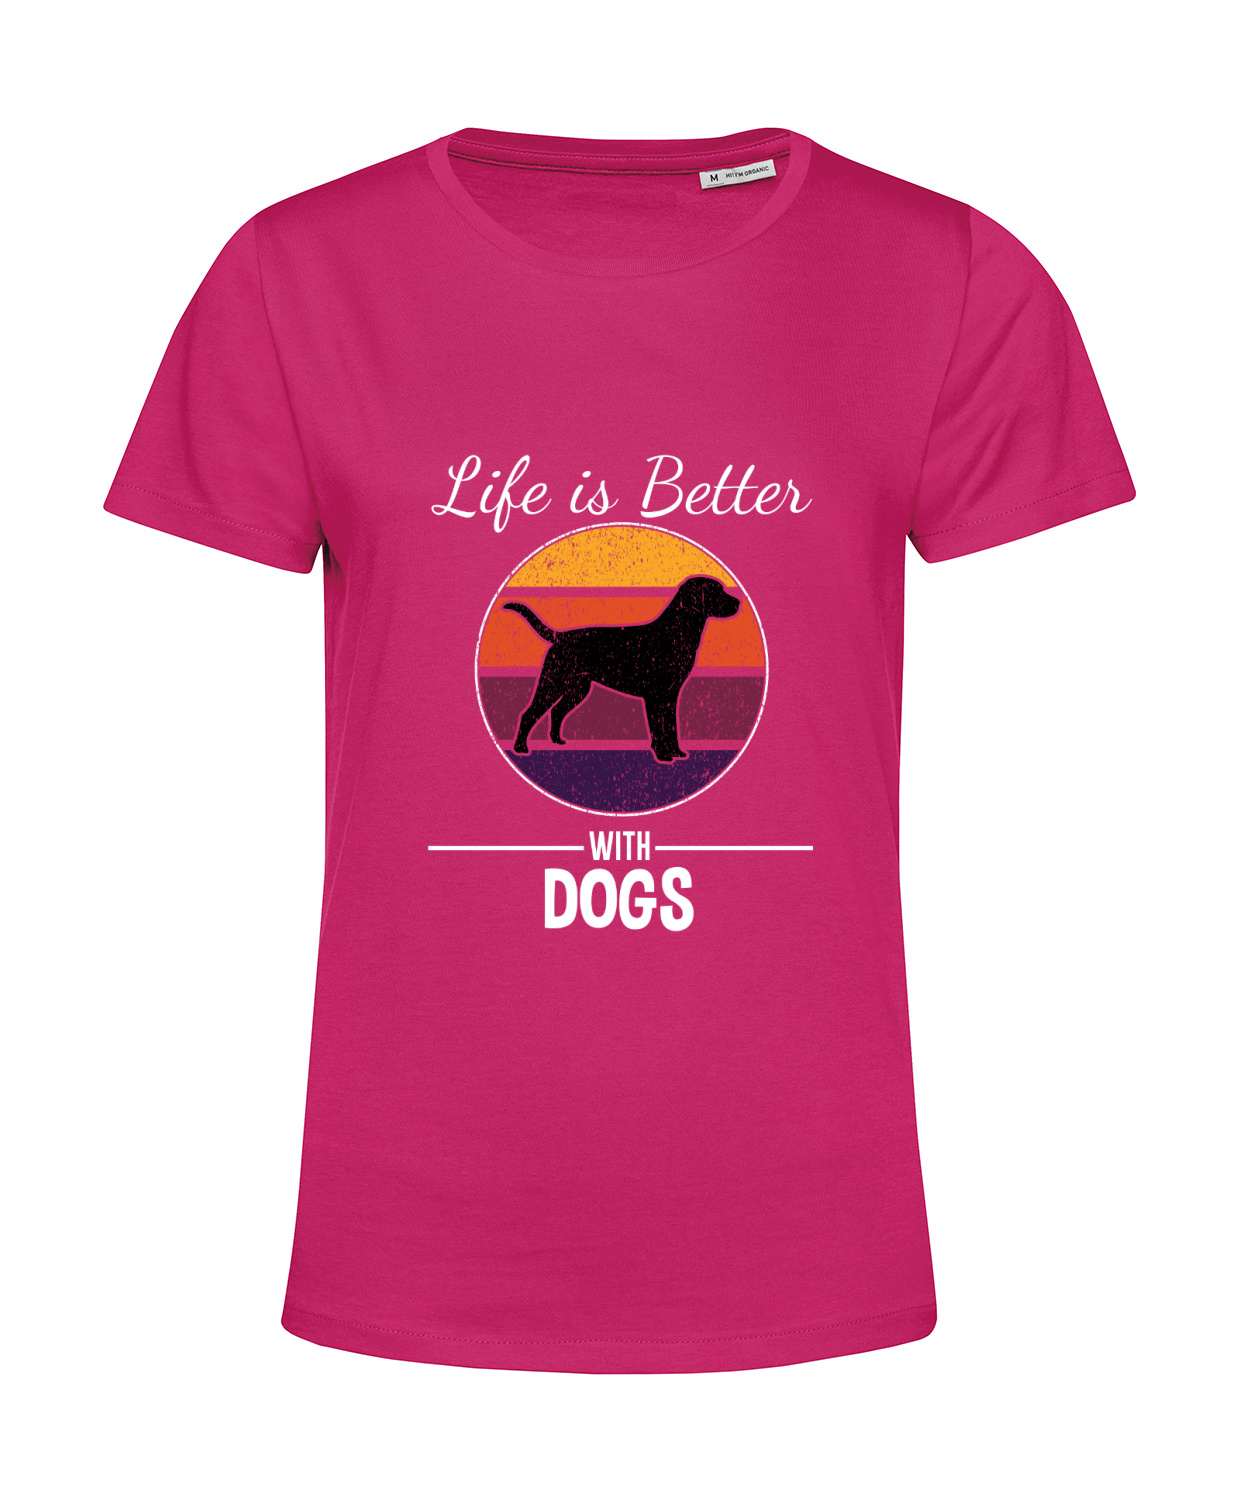 Nachhaltiges T-Shirt Damen Hunde - Life is Better with Dogs